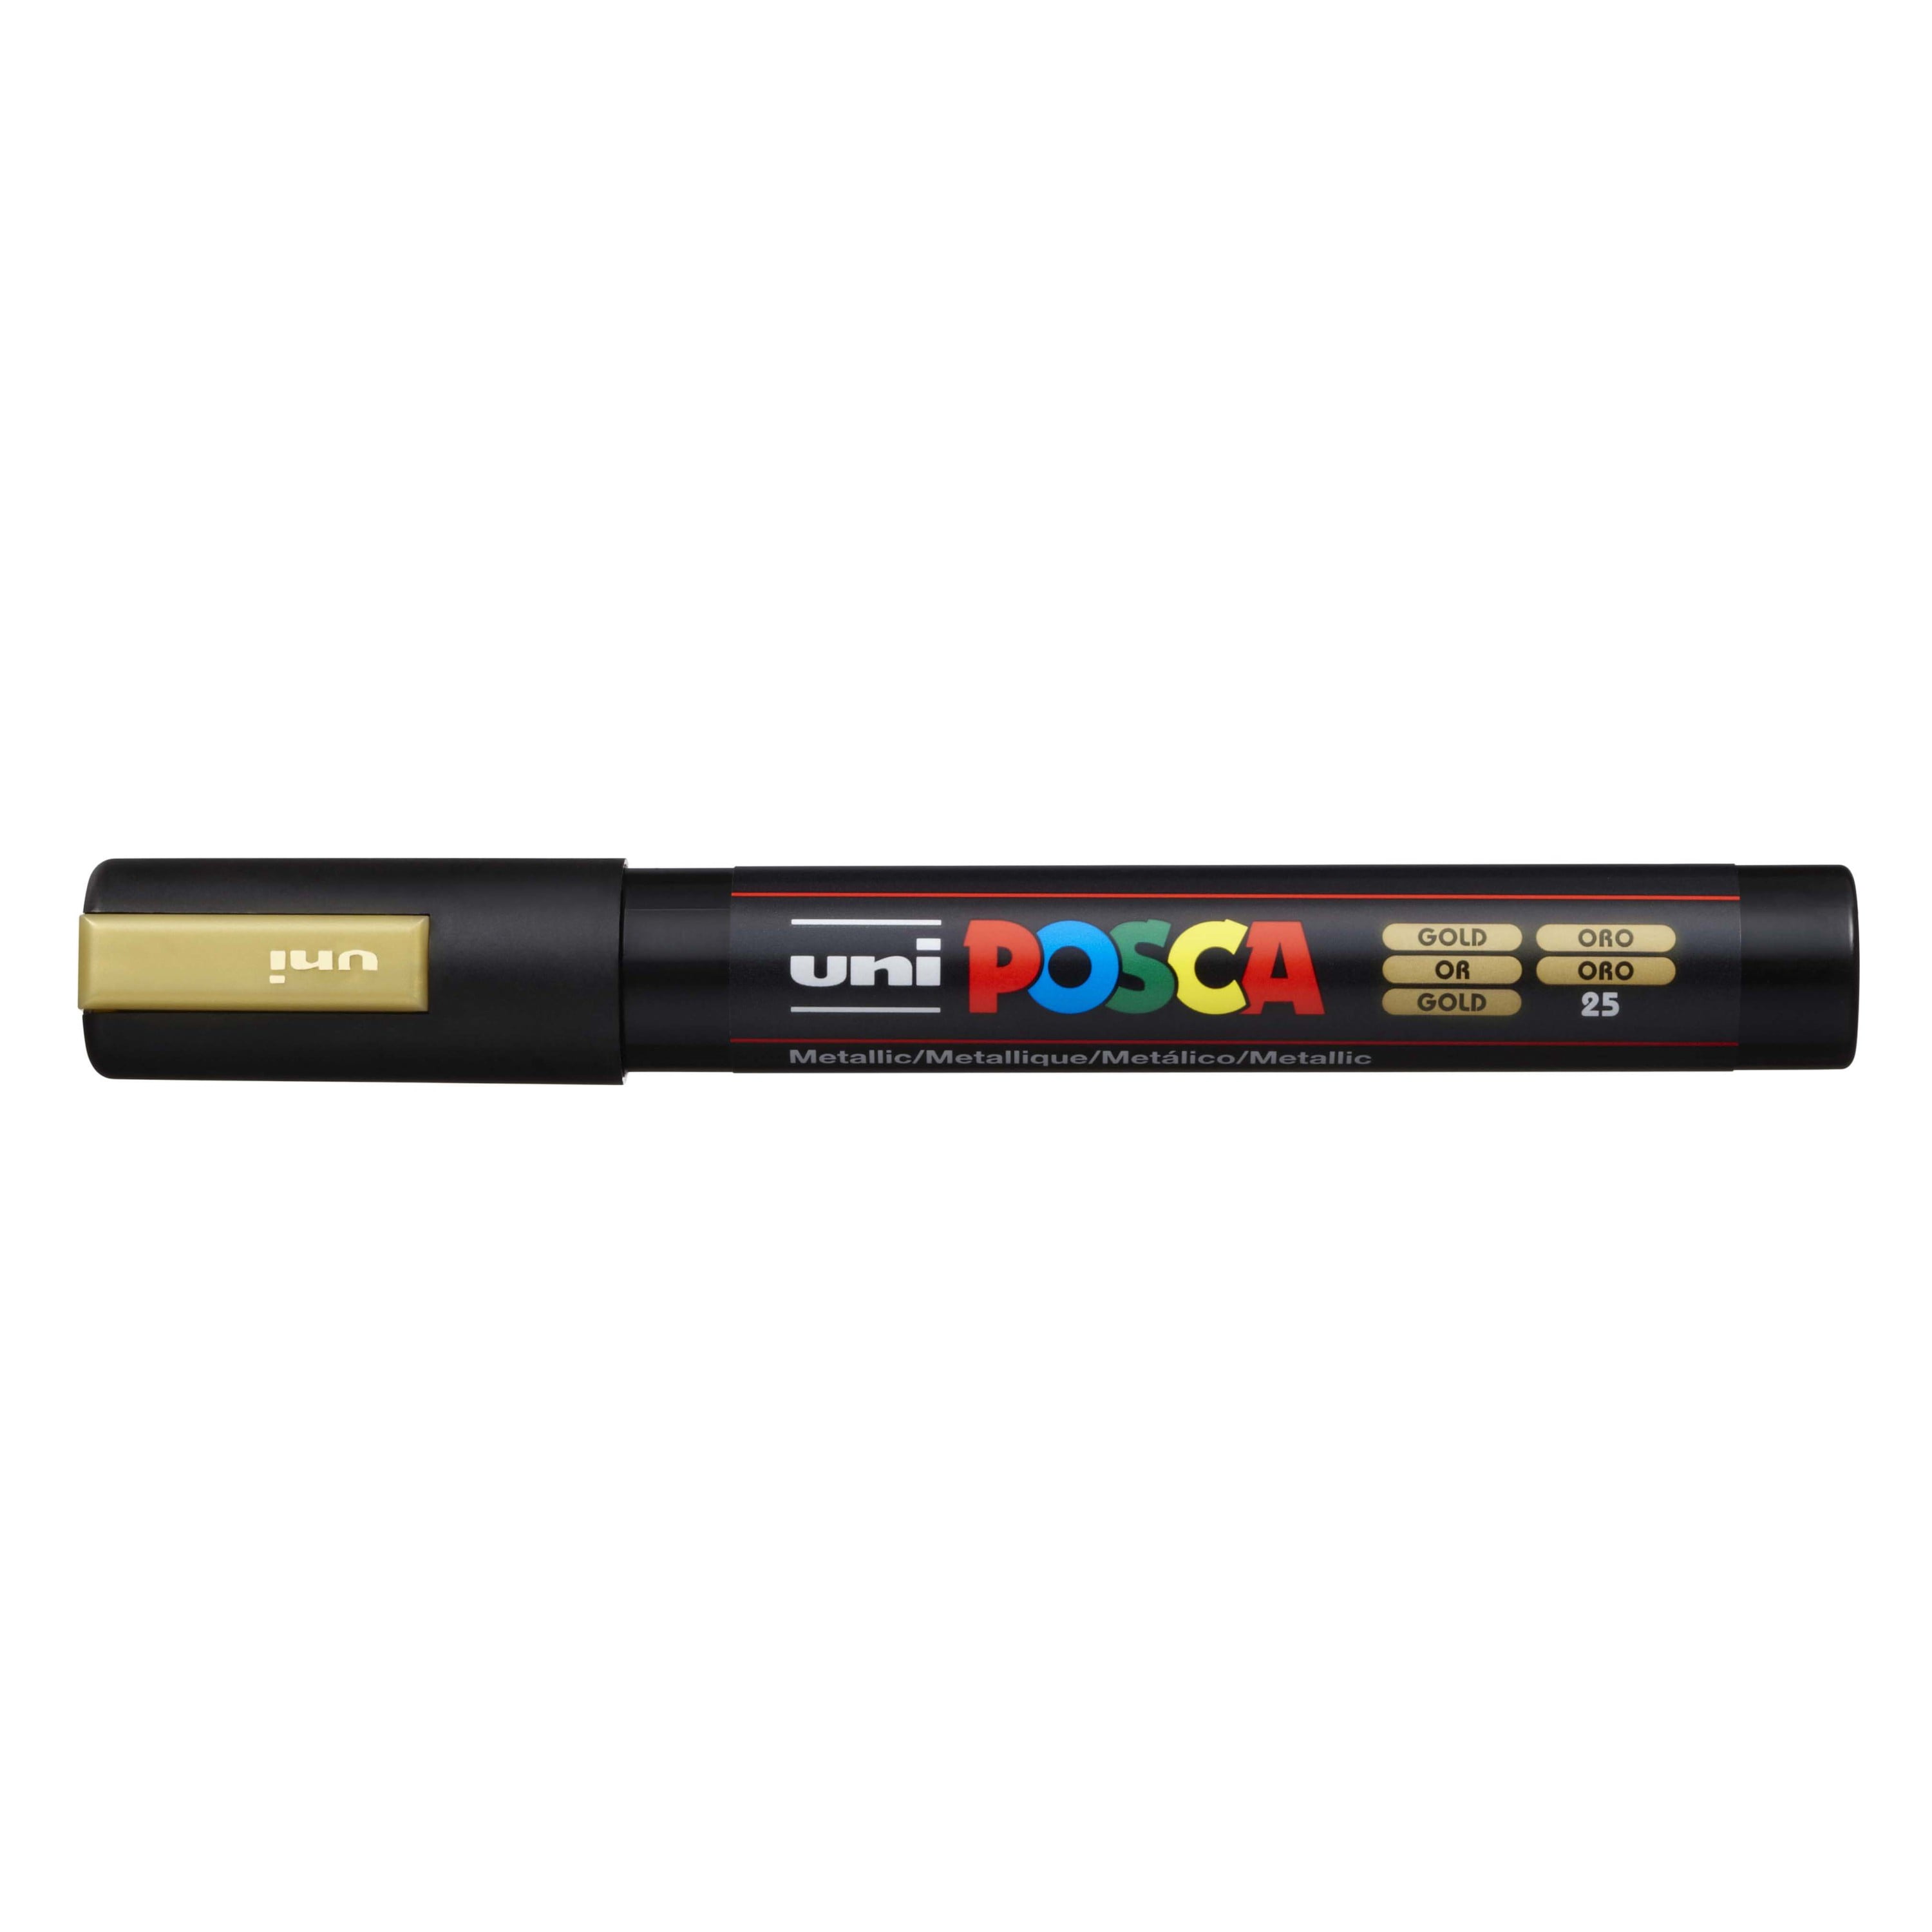 Posca PC-5M Water Based Permanent Marker Paint Pens. Medium Tip for Art &  Crafts. Multi Surface Use On Wood Metal Paper Canvas Cardboard Glass Fabric